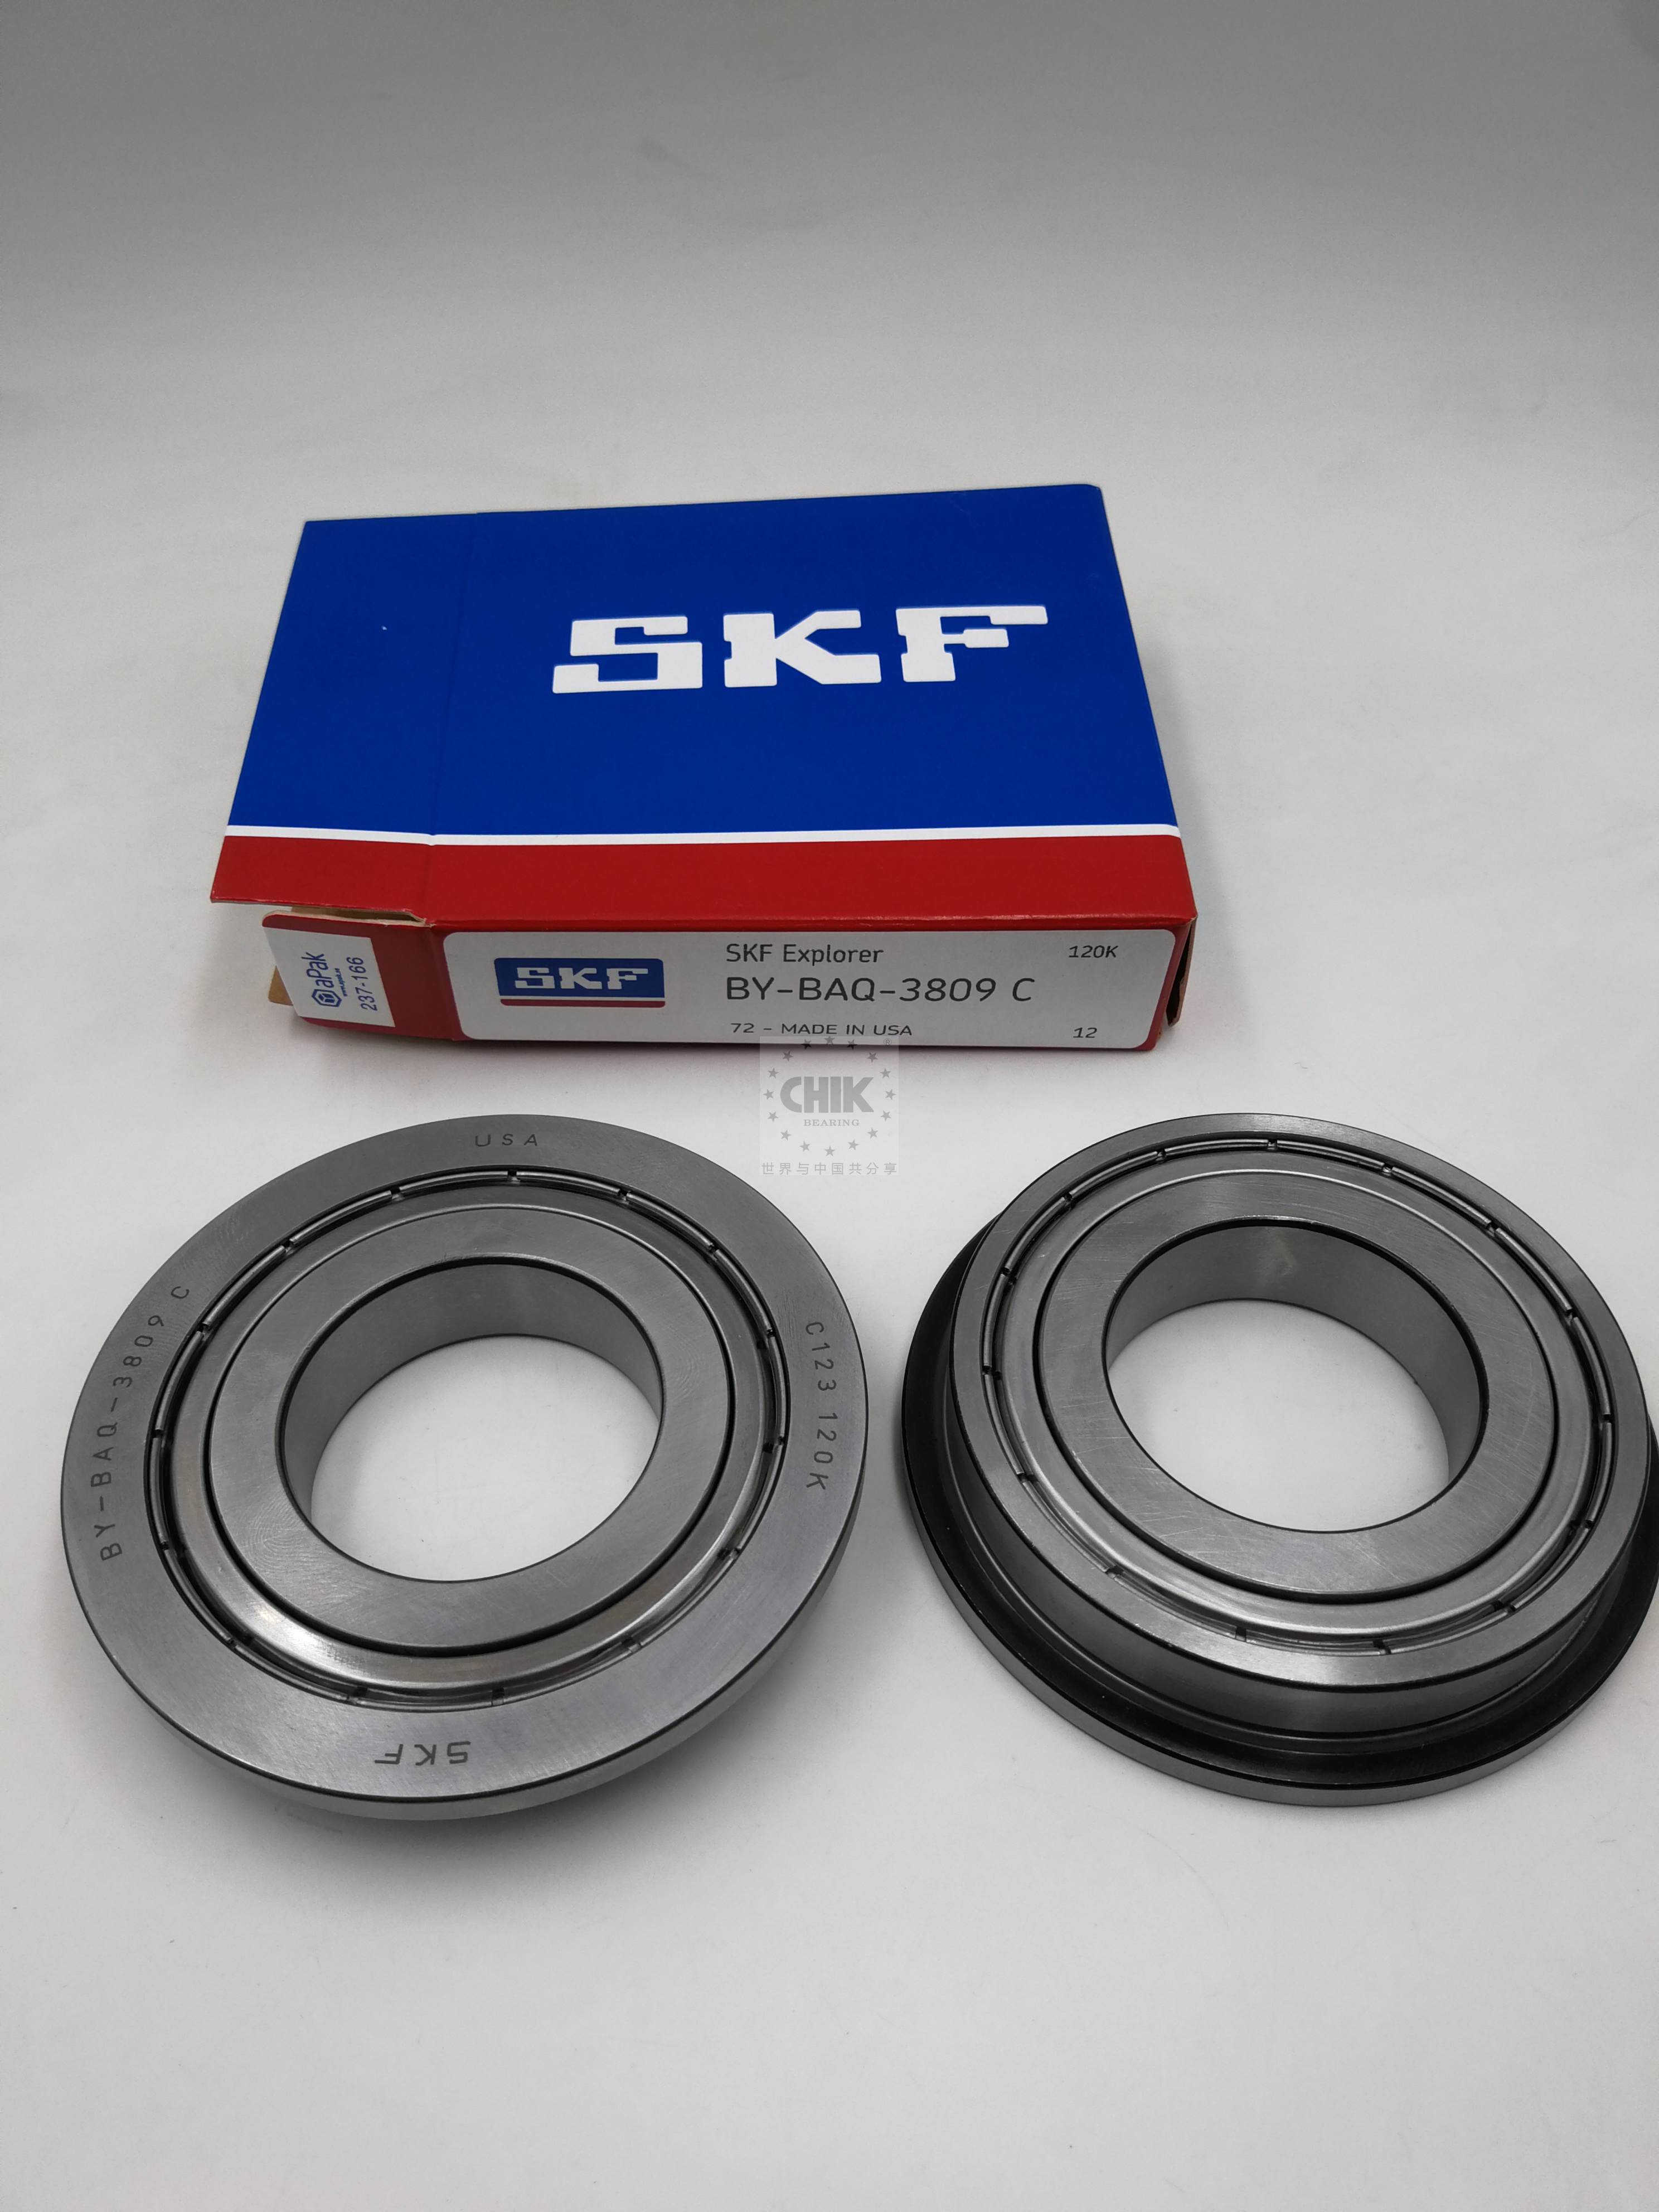 SKF Steering Bearing A2134601102 A2134603902 A2134601302 A2134604002 F-562525.04 452175272